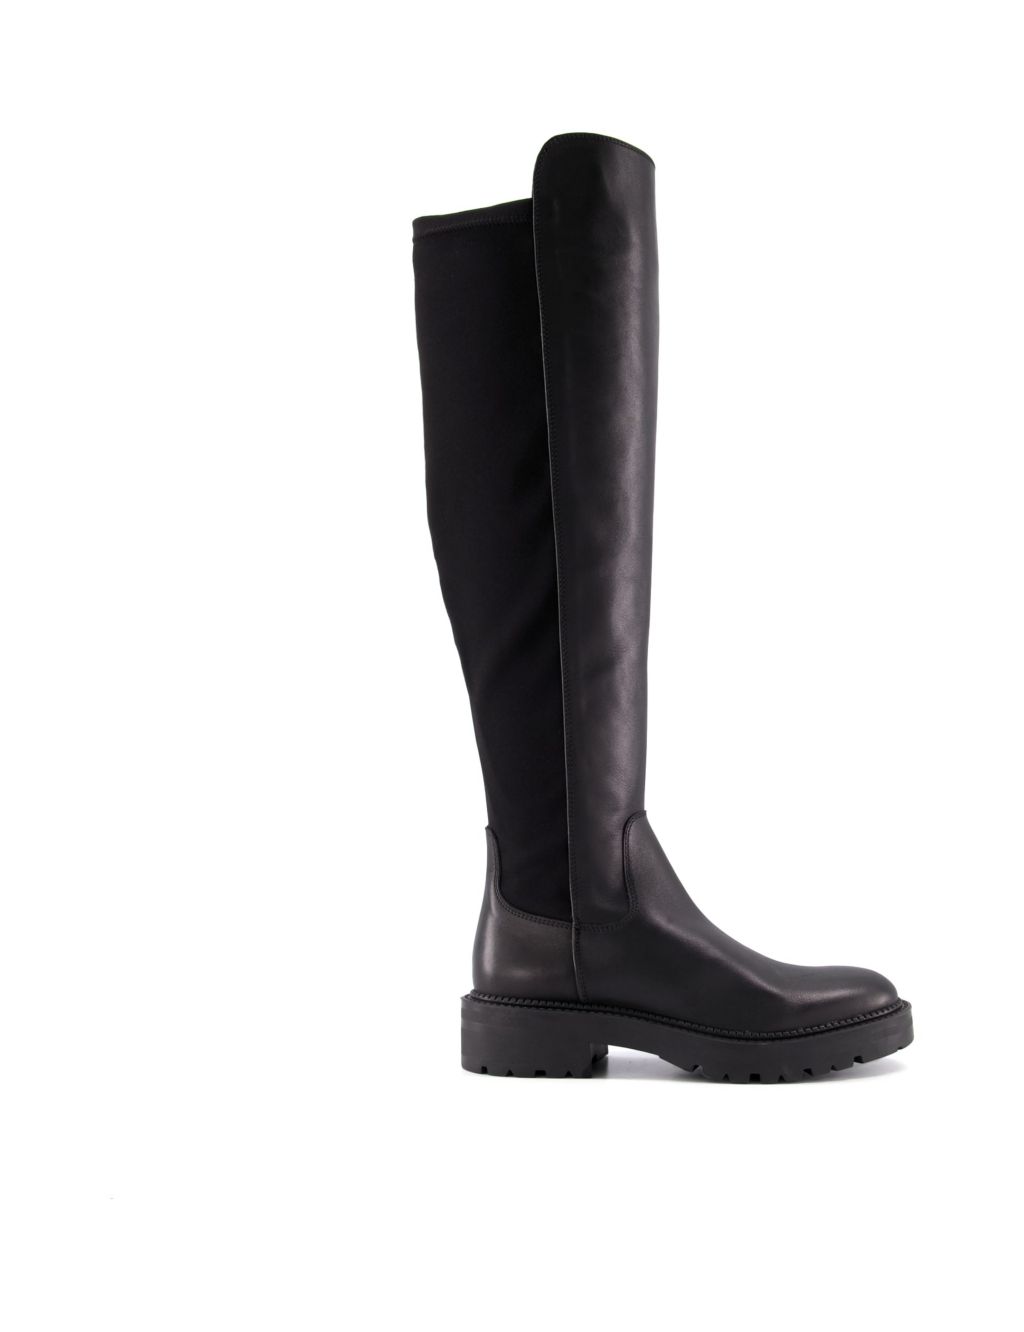 Leather Cleated Flatform Knee High Boots | Dune London | M&S